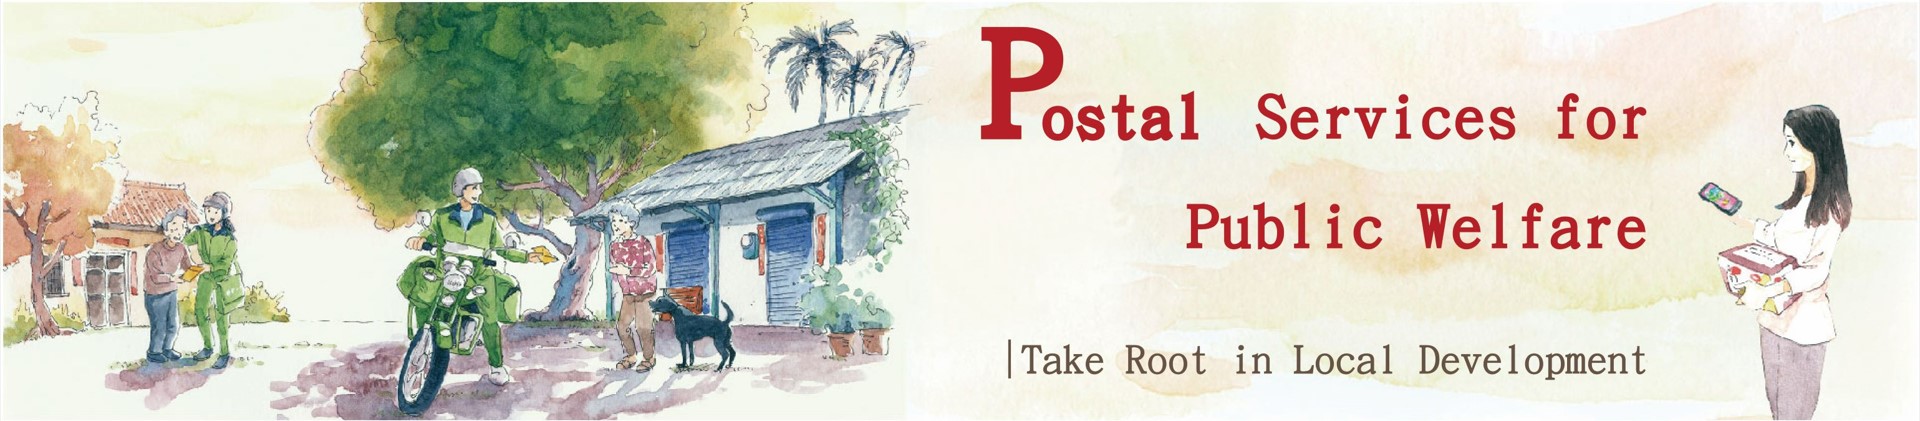 Postal Services for Public Welfare - Take Root in Local Development